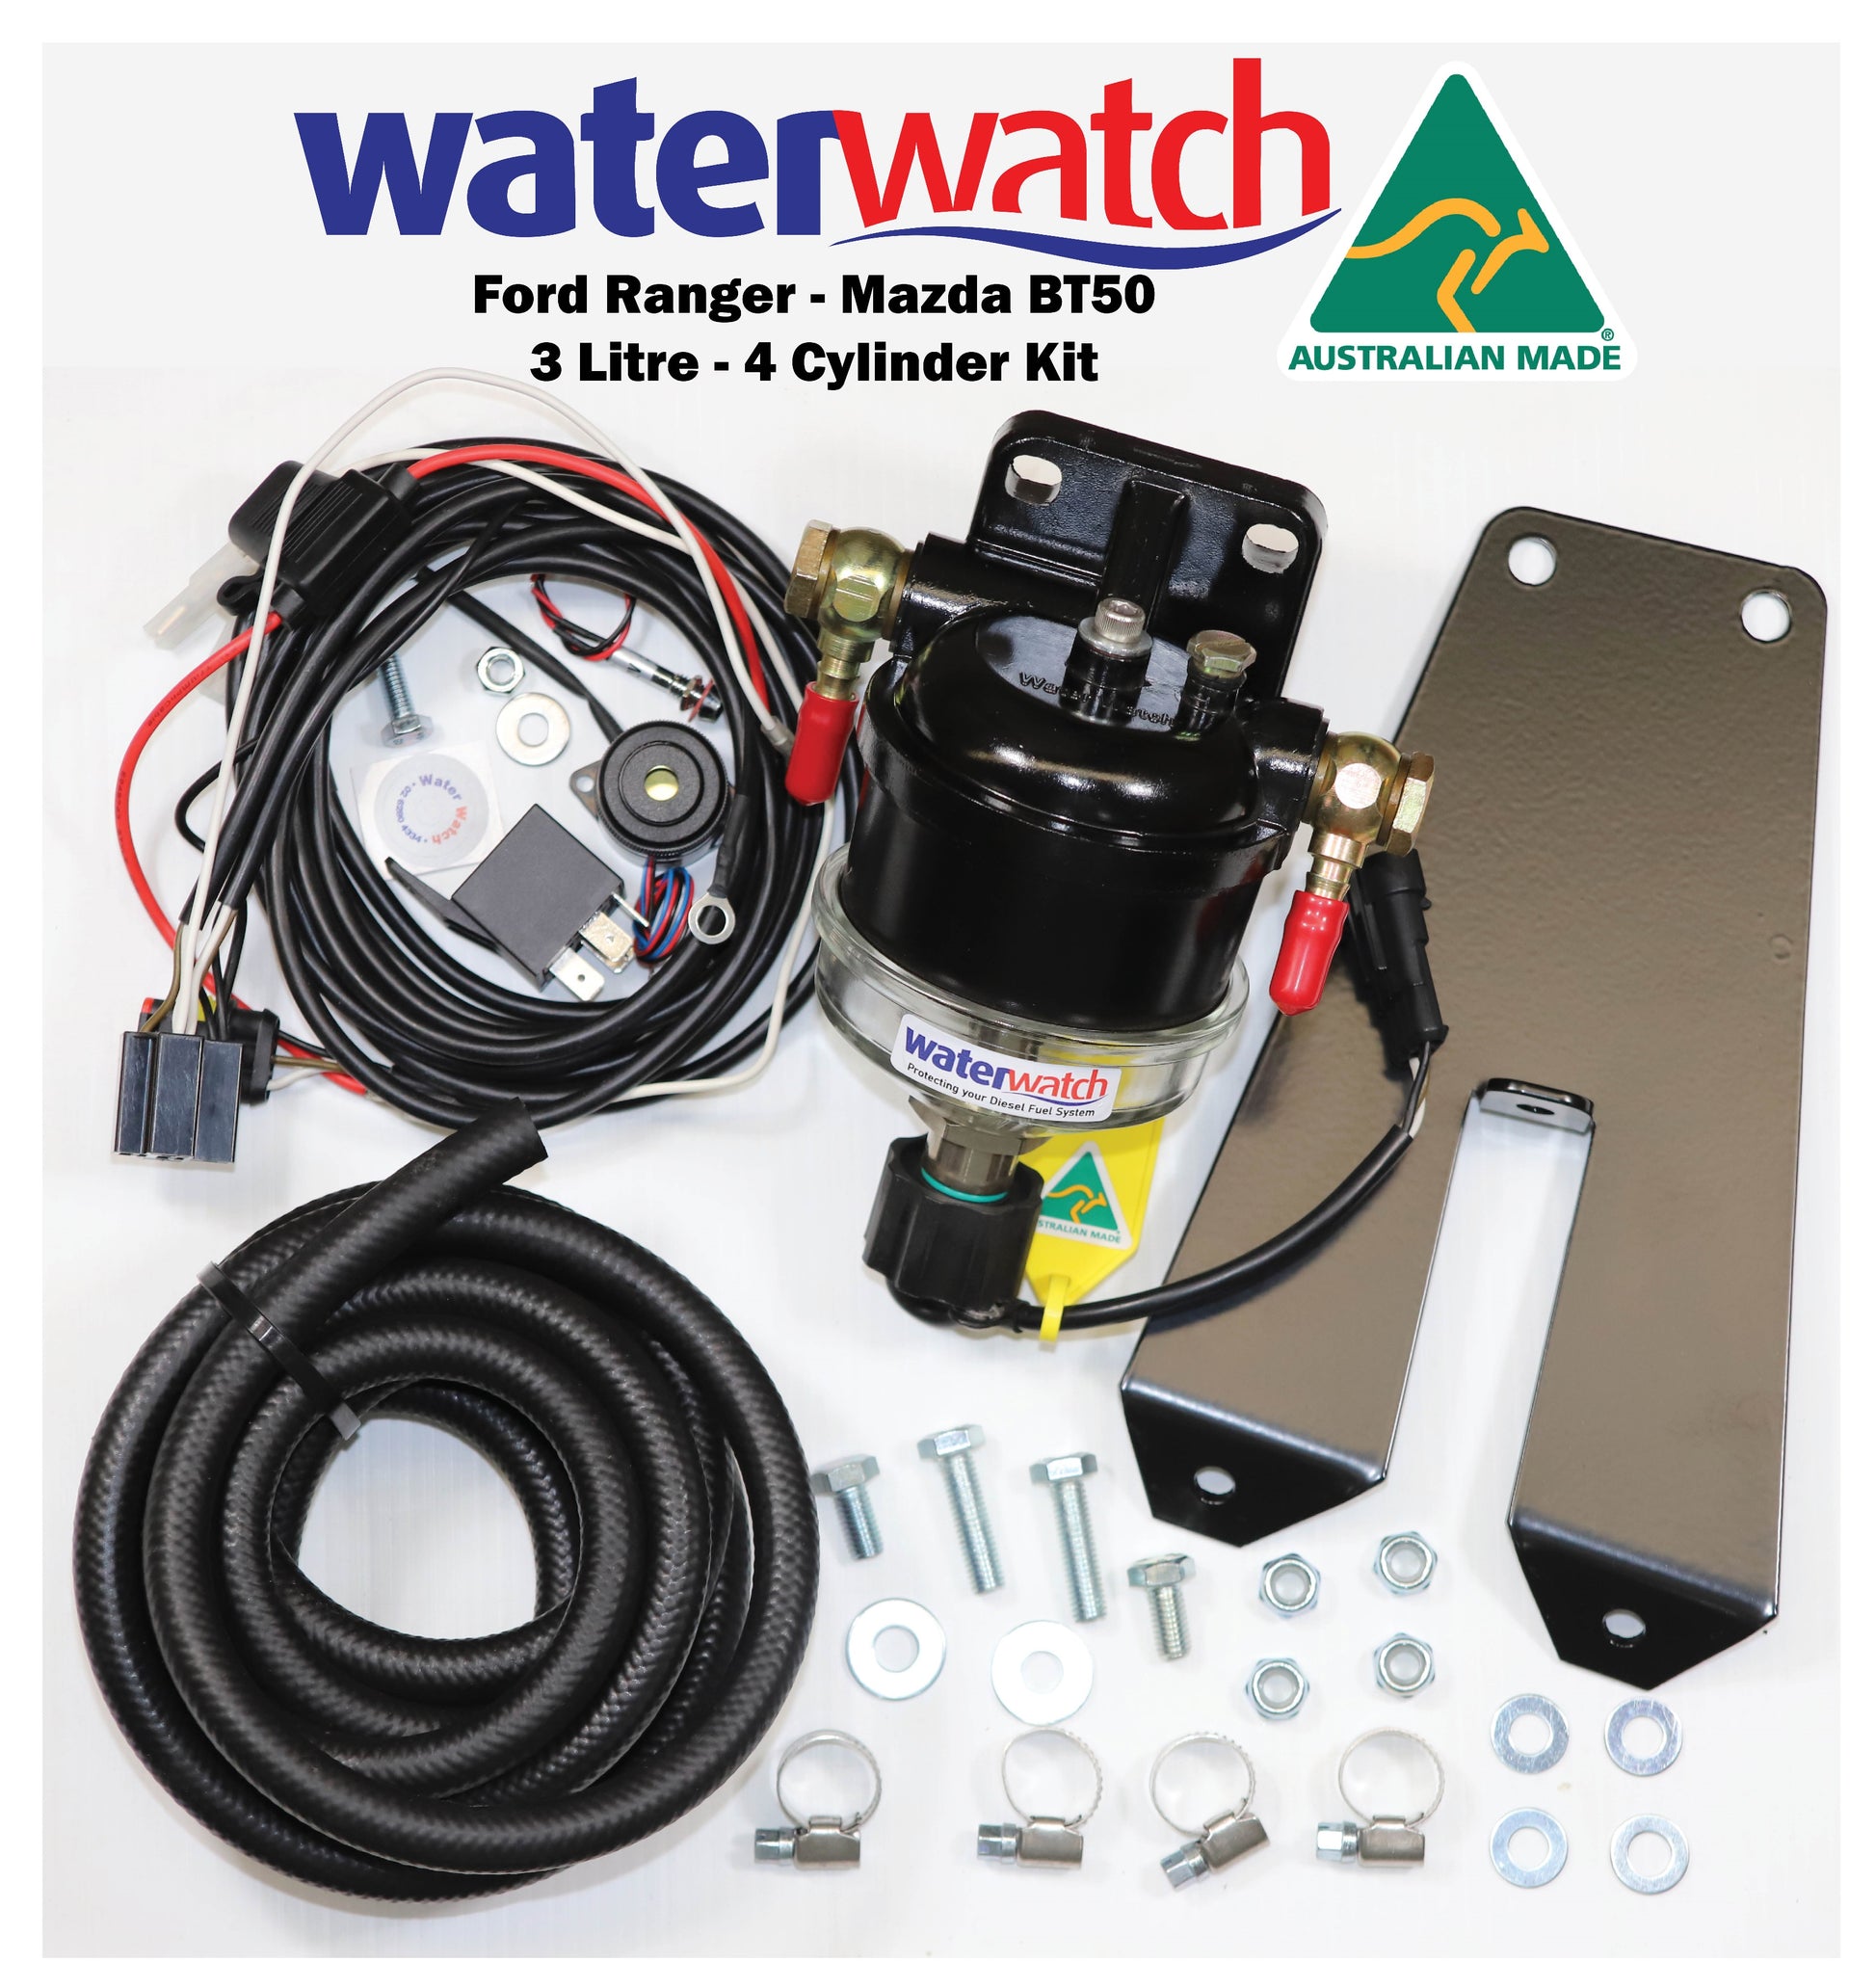 Water Watch Ford Ranger 3.0L - 4Cyl.  Protection against Diesel Fuel Contamination Damage - Specialist Tools Australia